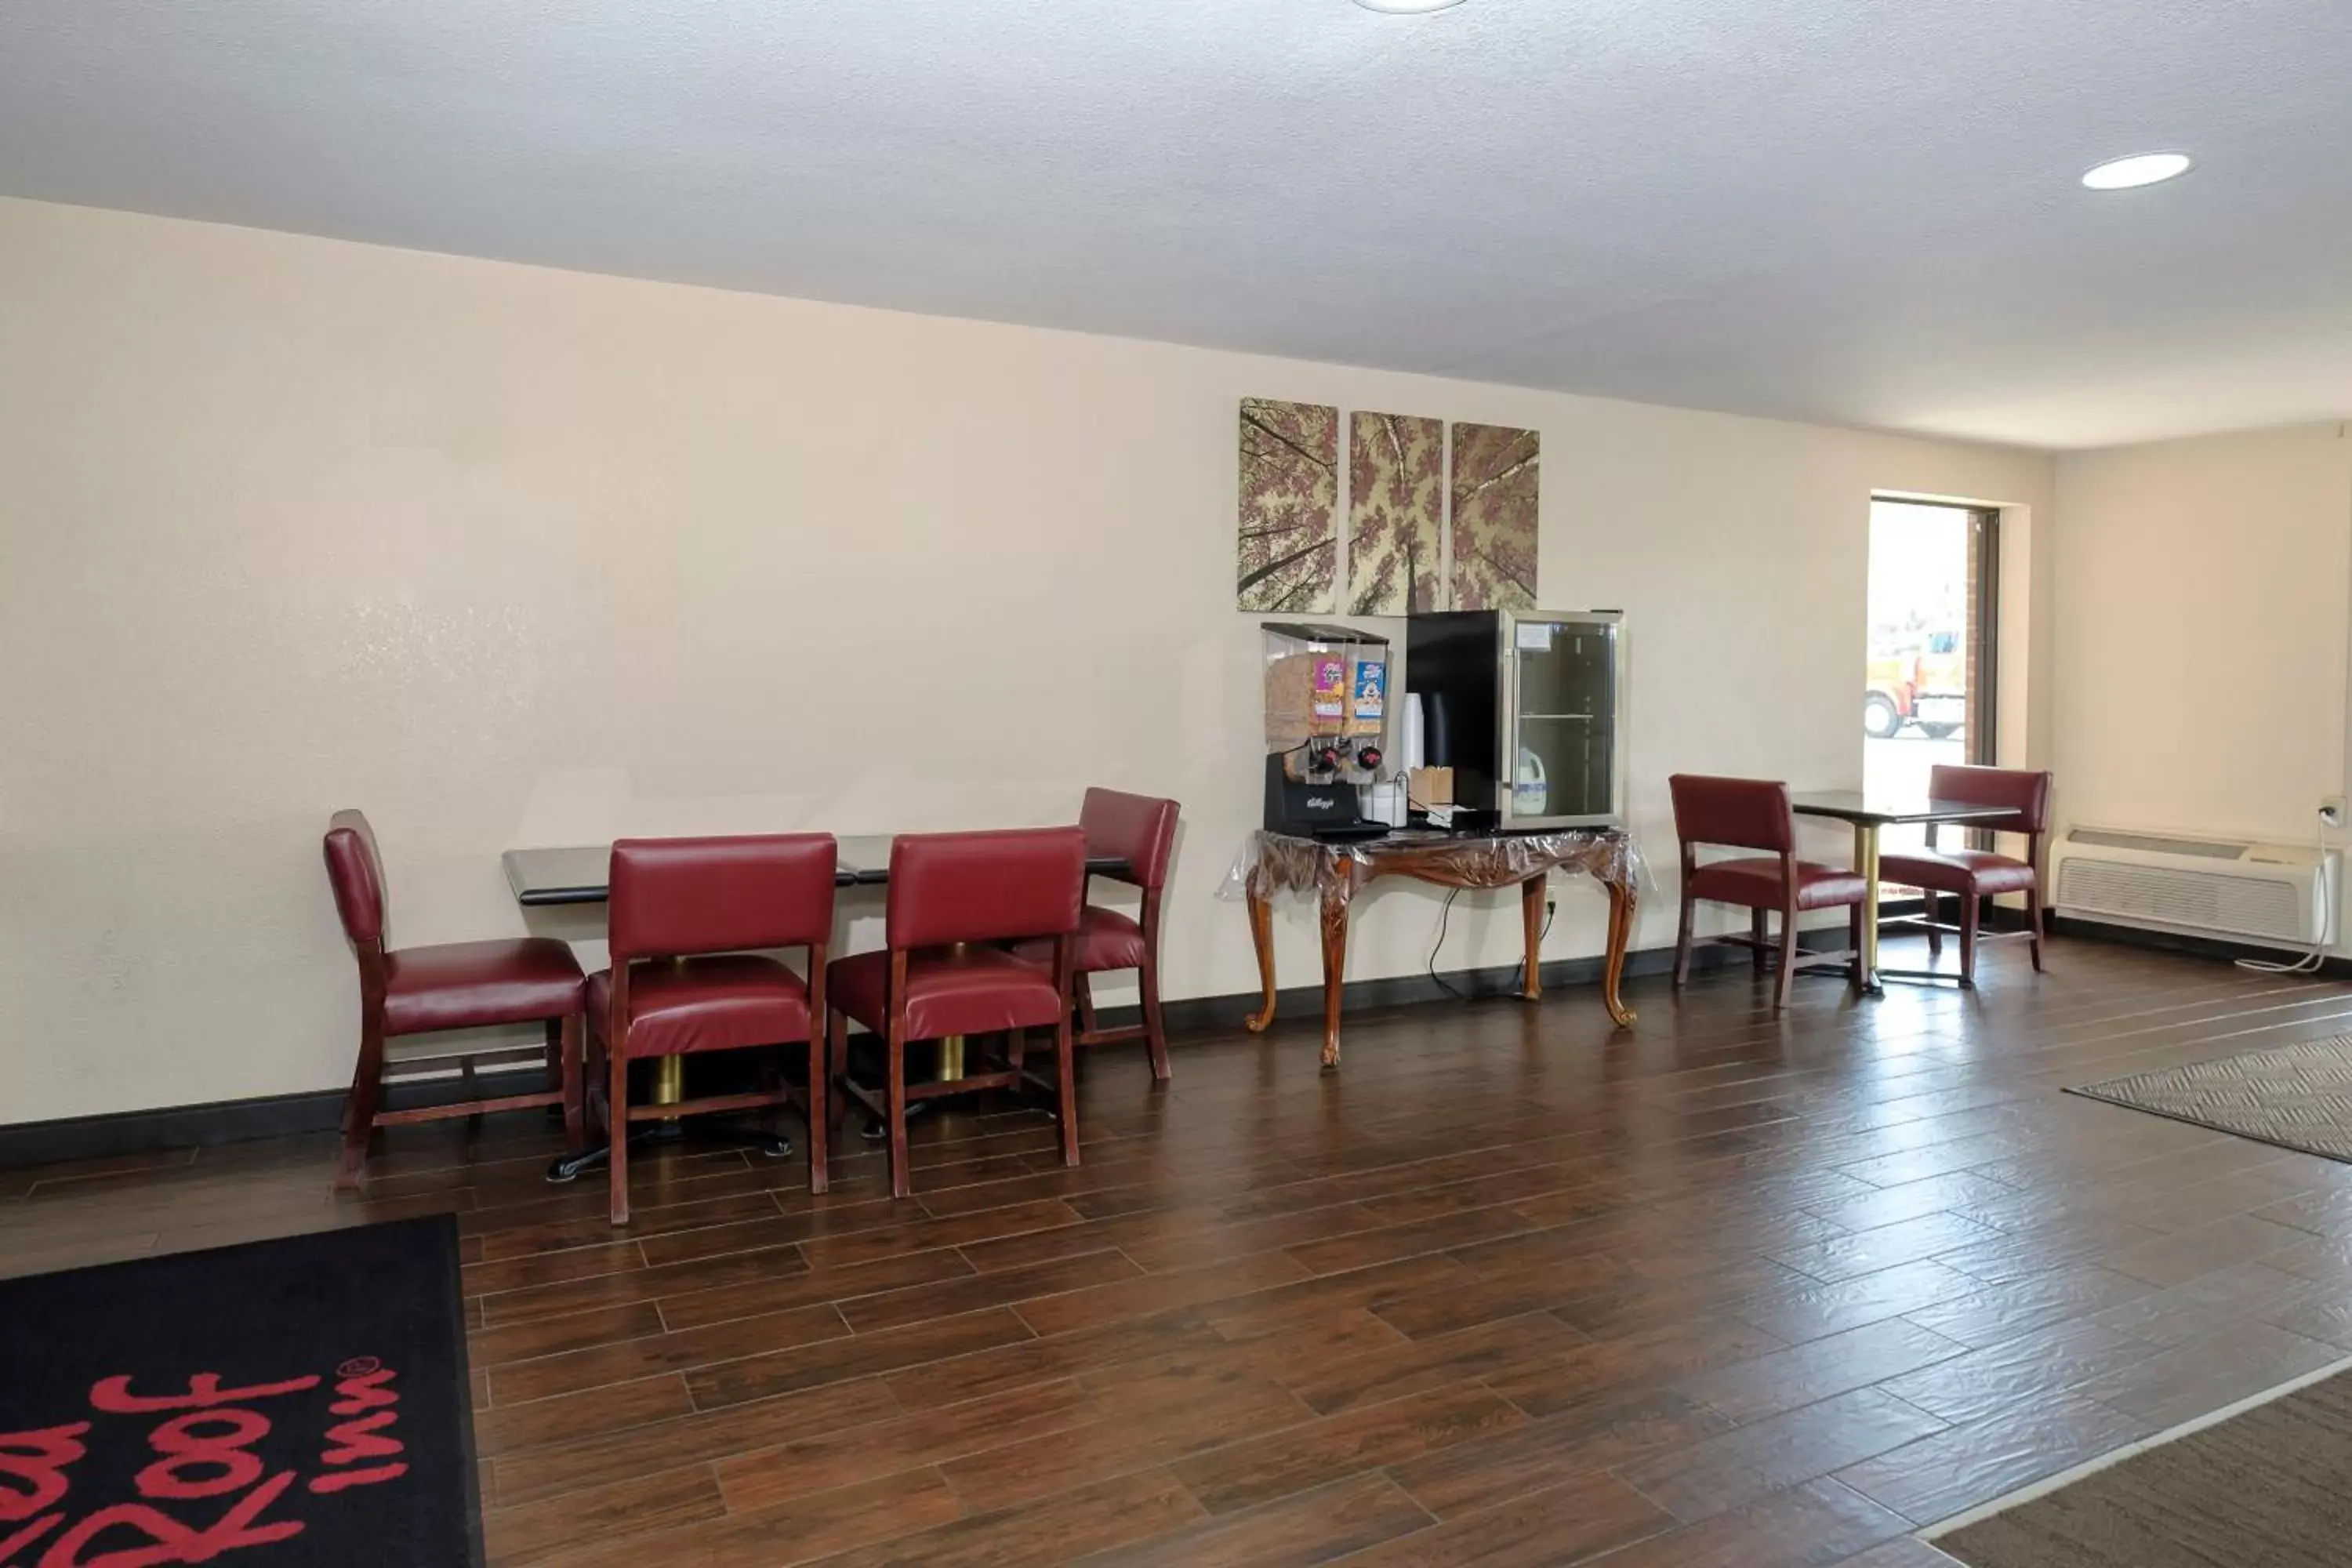 Lobby or reception in Red Roof Inn Hillsville